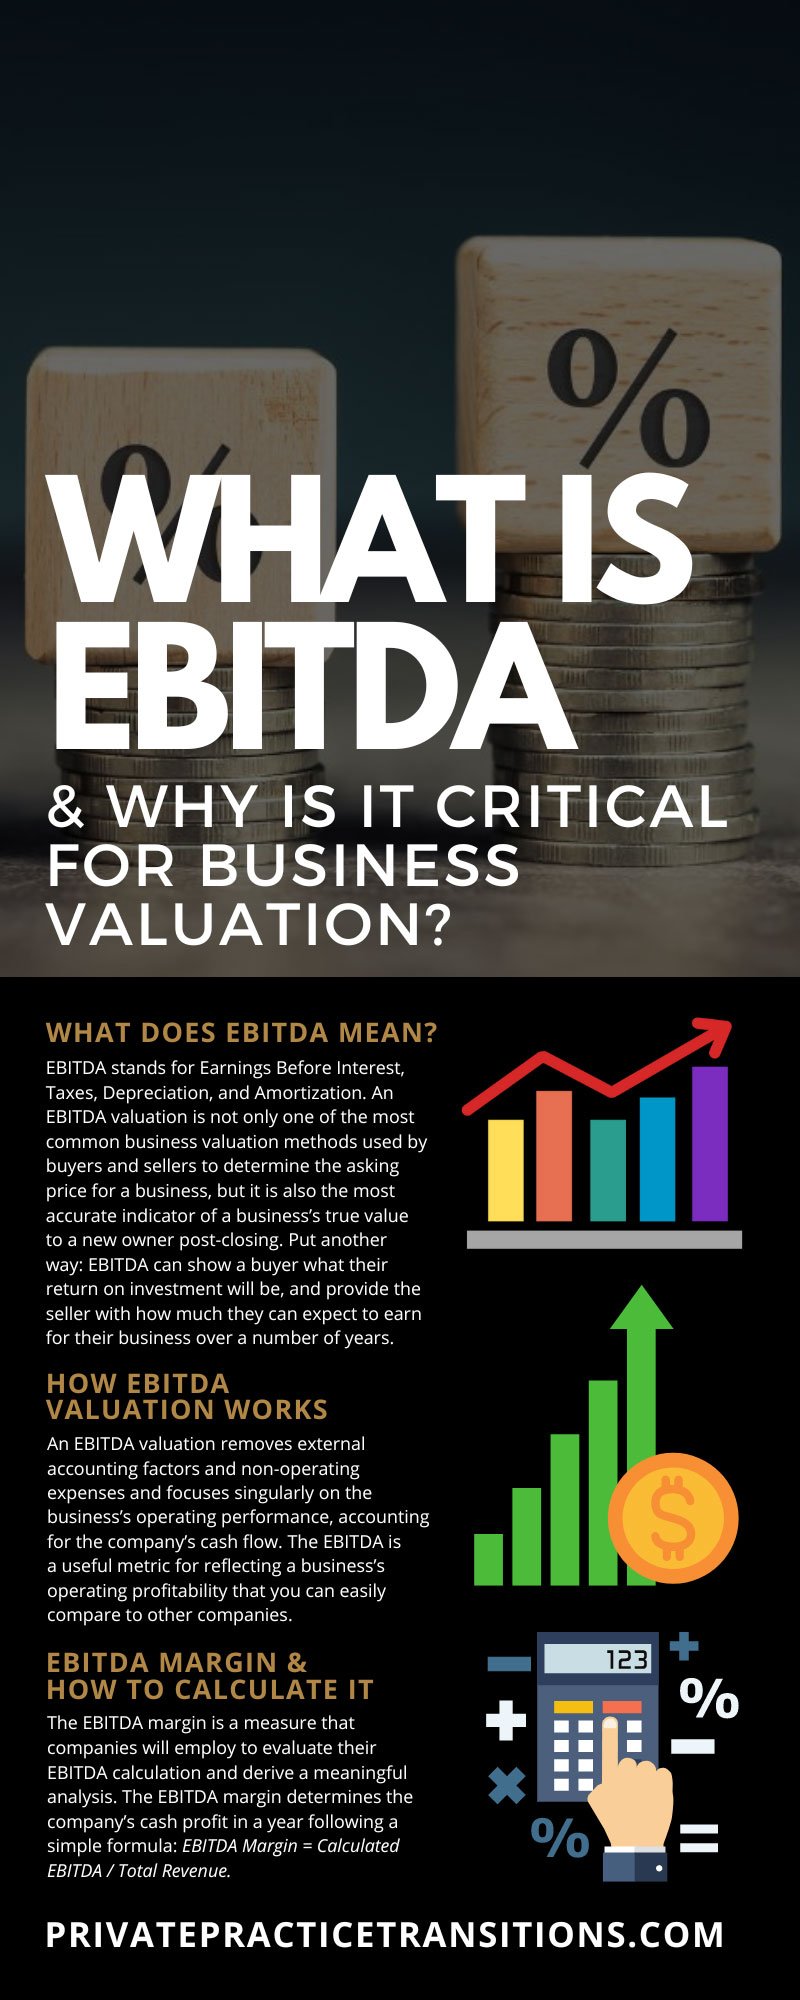 What Is EBITDA & Why Is It Critical for Business Valuation?